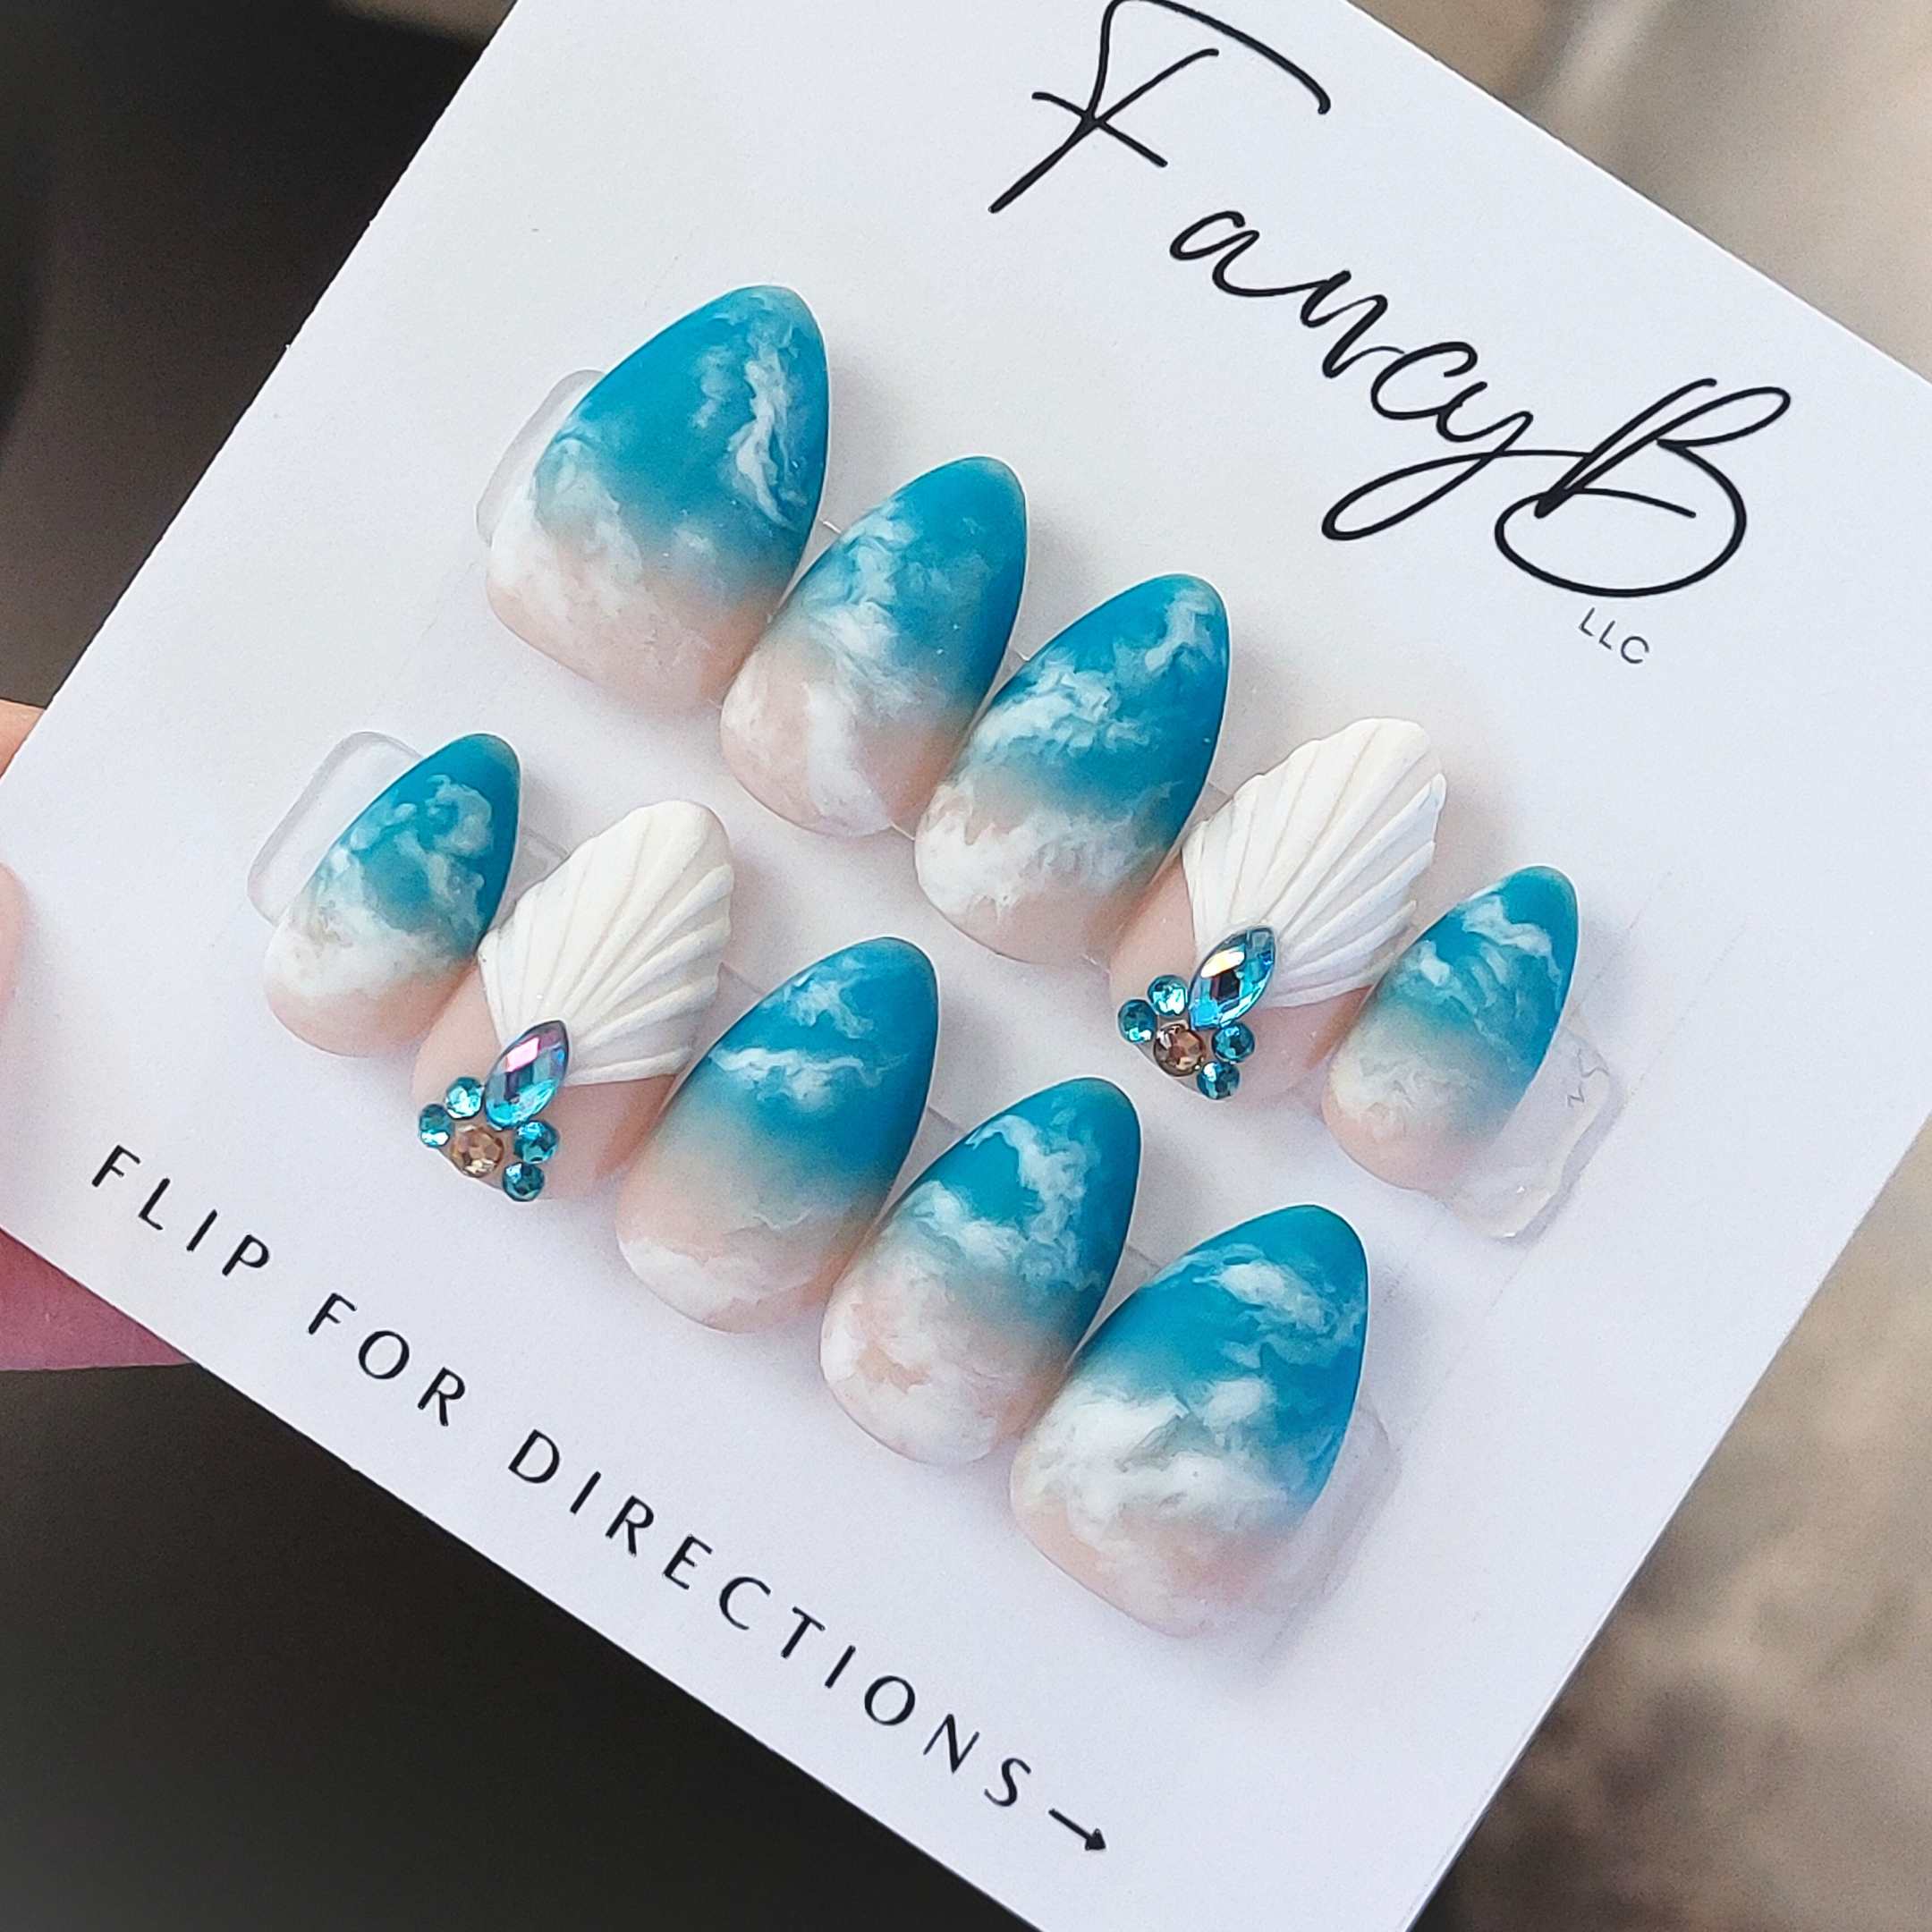 Custom beach nails, ocean waves nail design with blue waves and white 3d seashell nail with blue gems. custom handmade nails by fancyb nails.